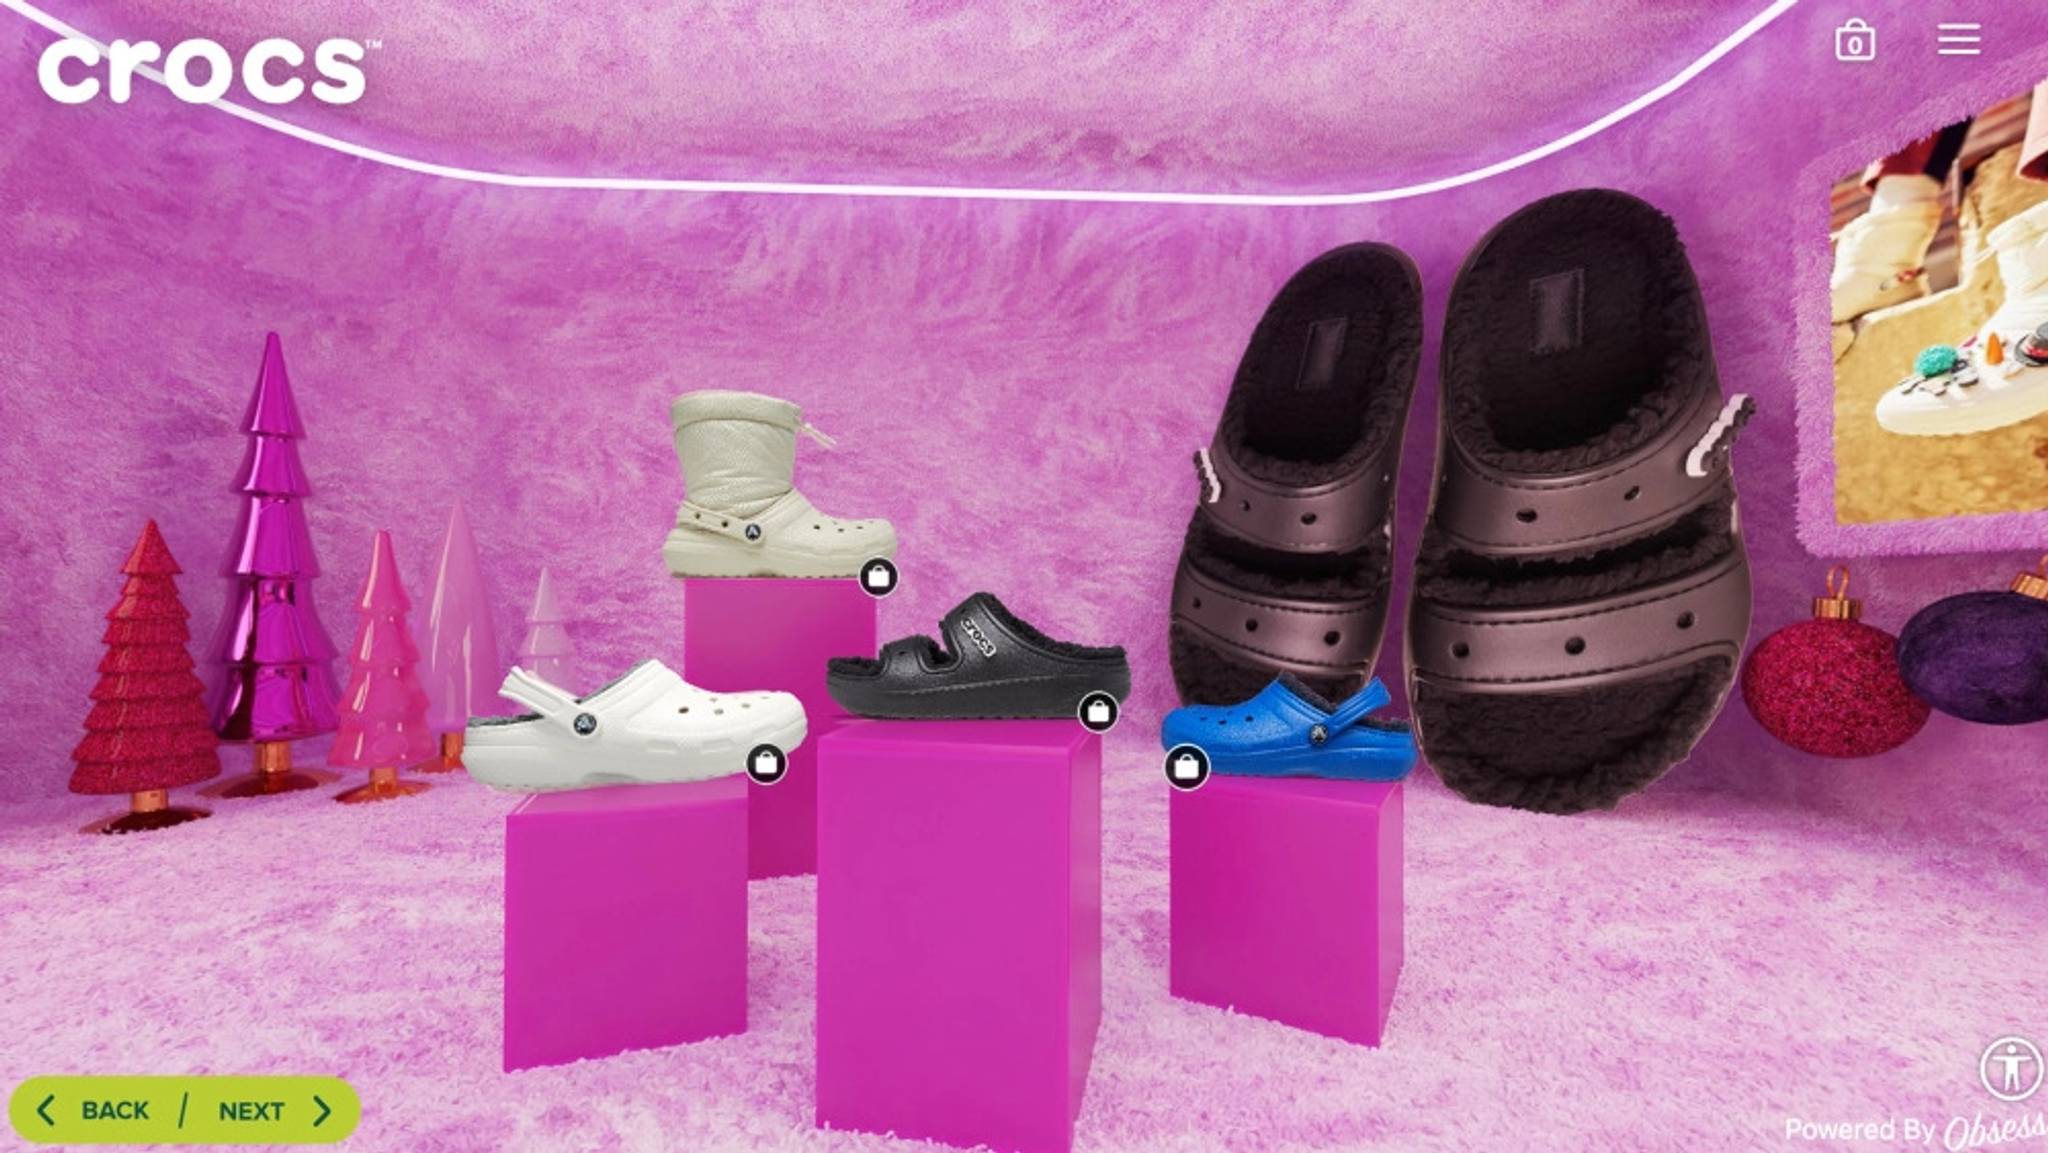 Crocs virtual holiday shop caters to bored online buyers